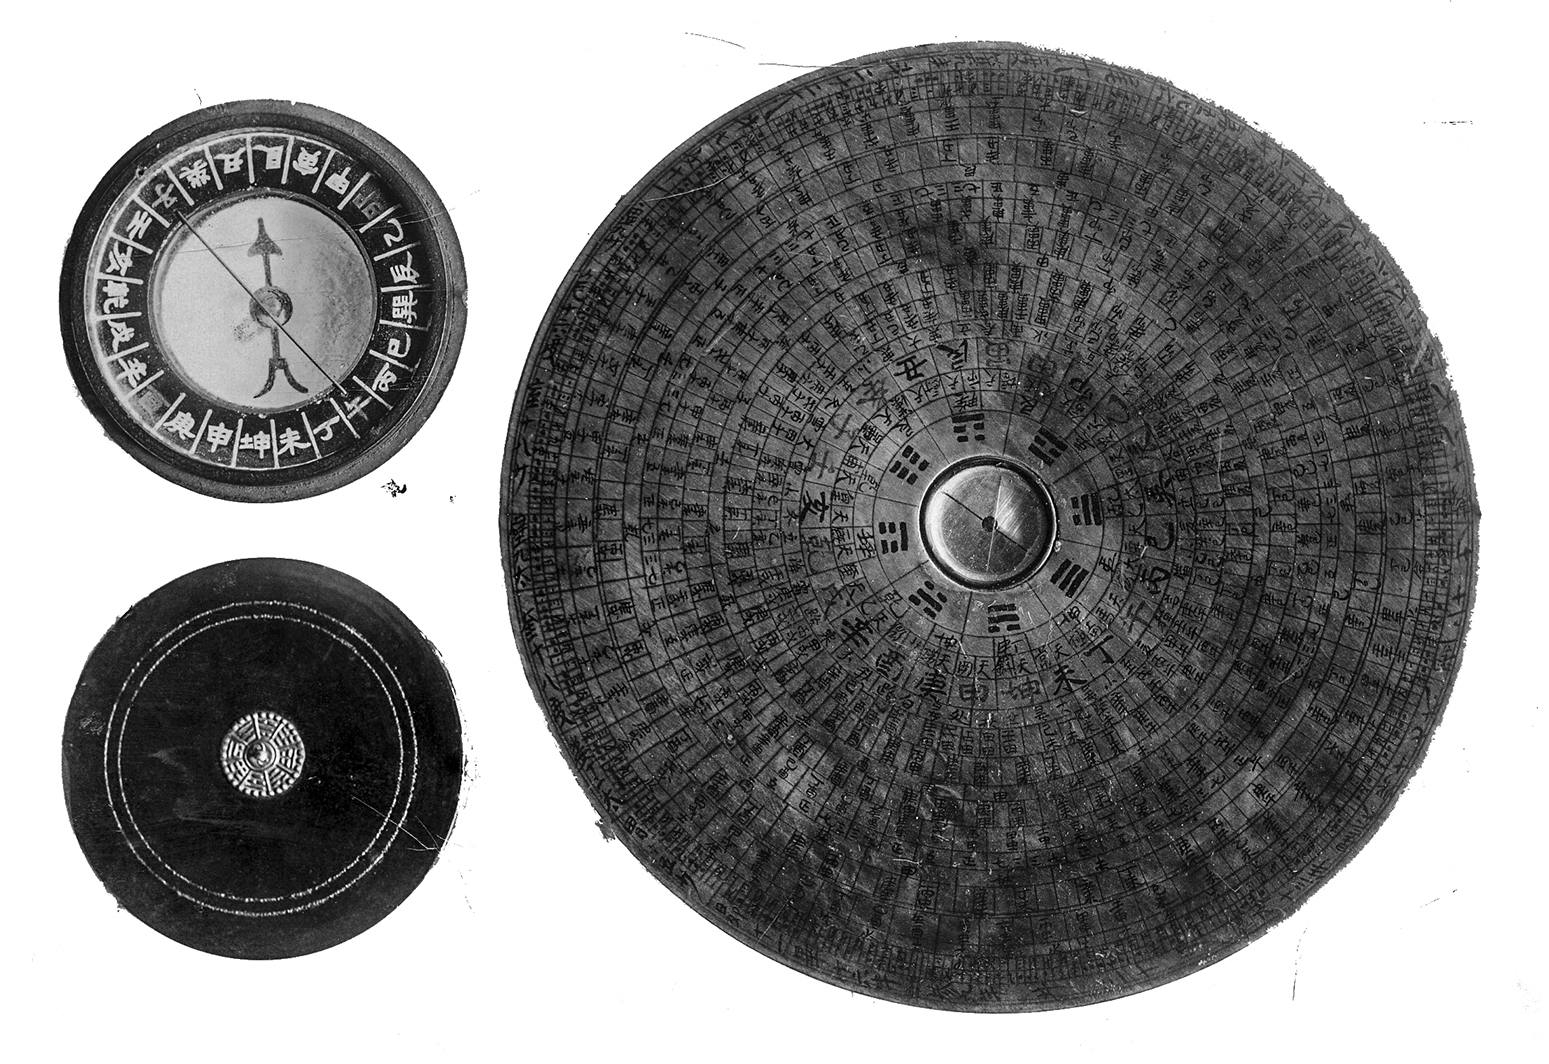 Chinese compasses. Naval Institute Photo Archive